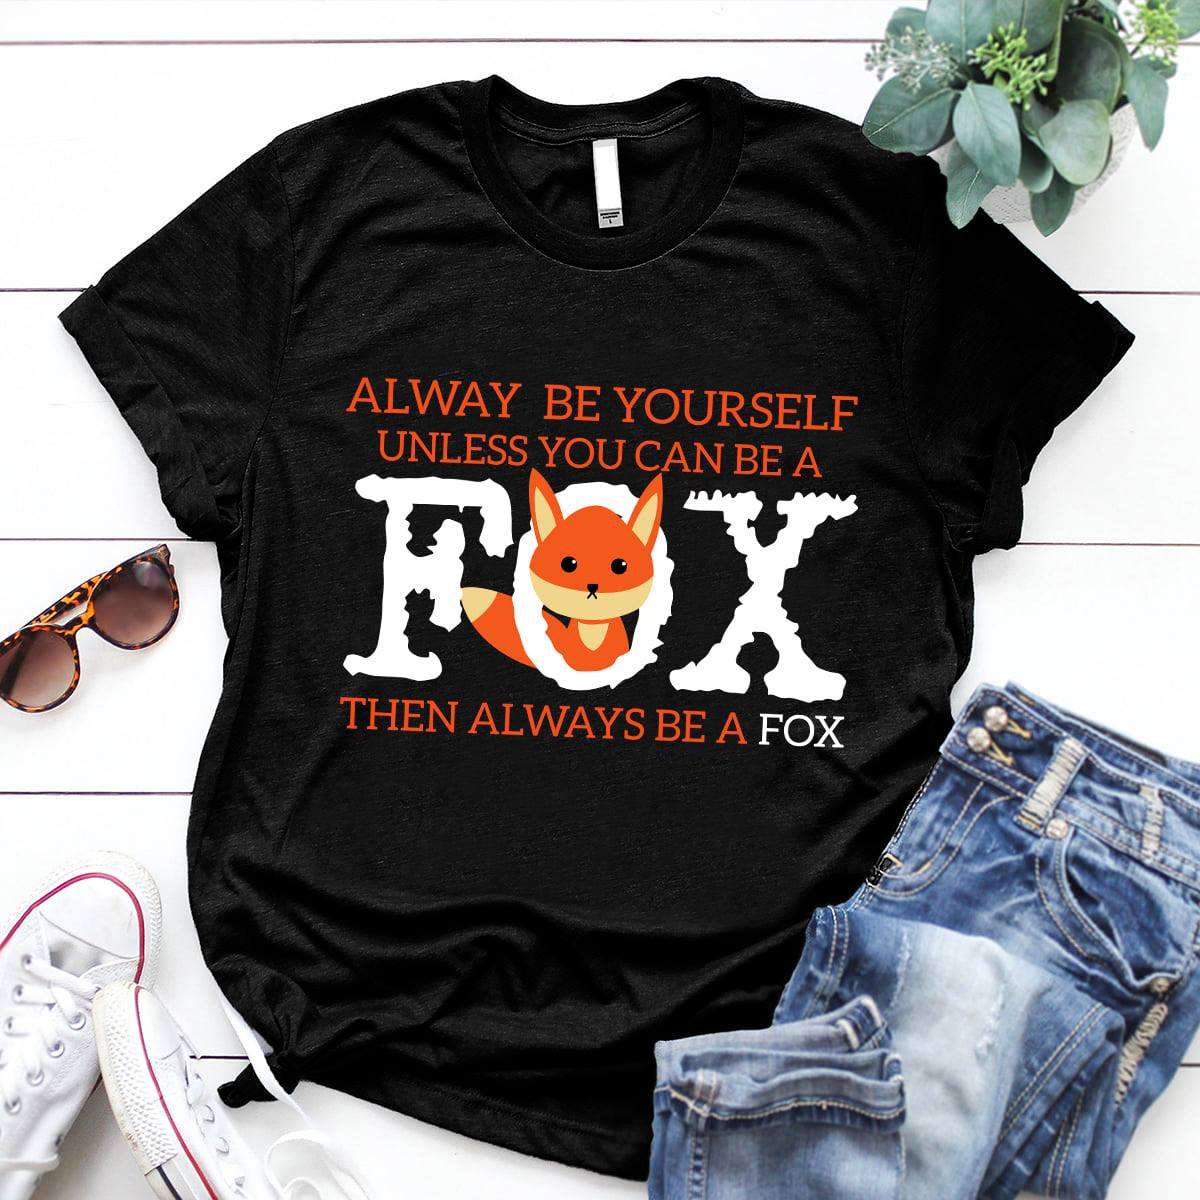 Alway be yourself unless you can be a fox then always be a fox - Fox Shirt Gifts